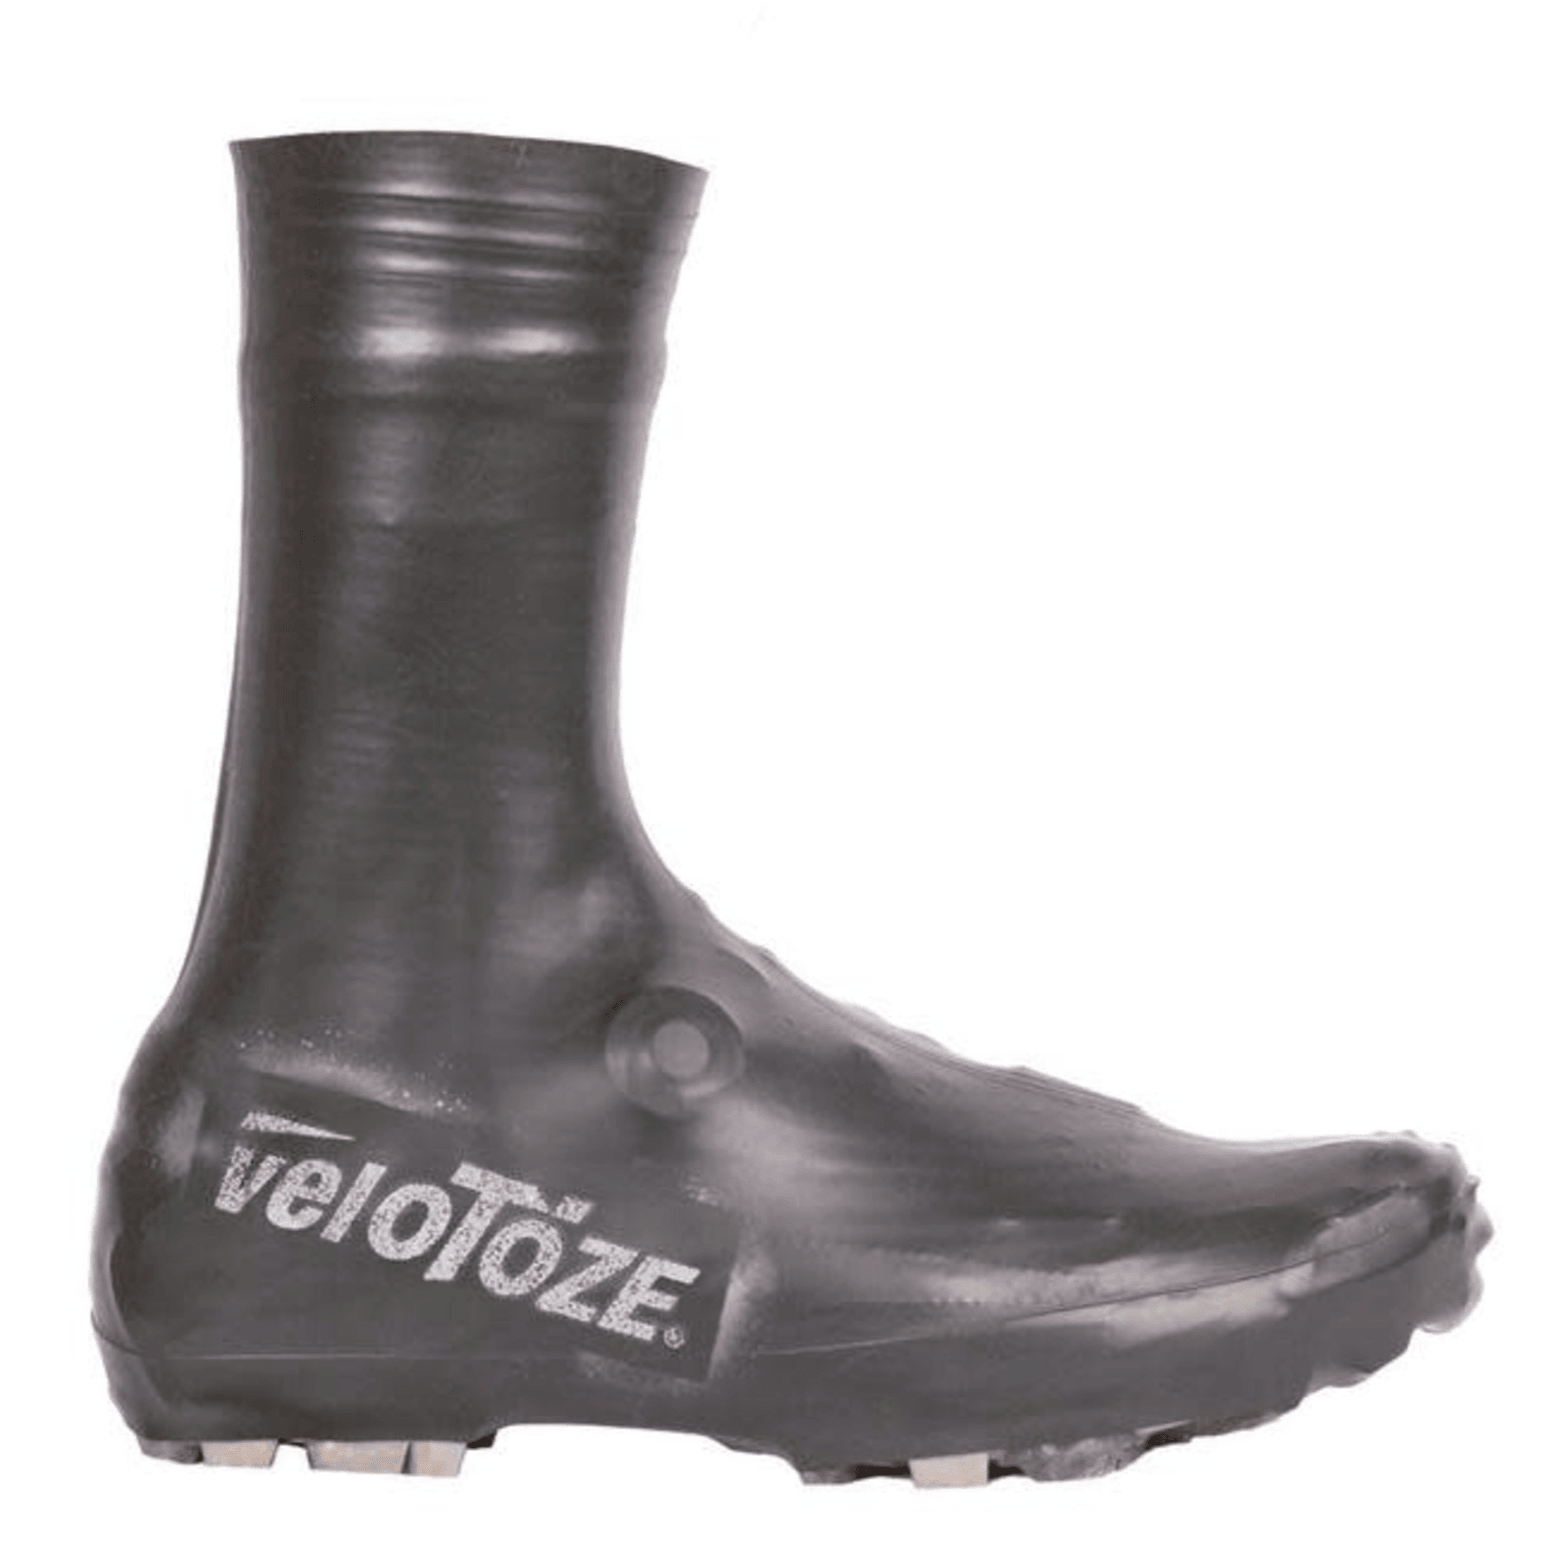 veloToze MTB Tall Shoe Cover Black / Small Apparel - Apparel Accessories - Shoe Covers